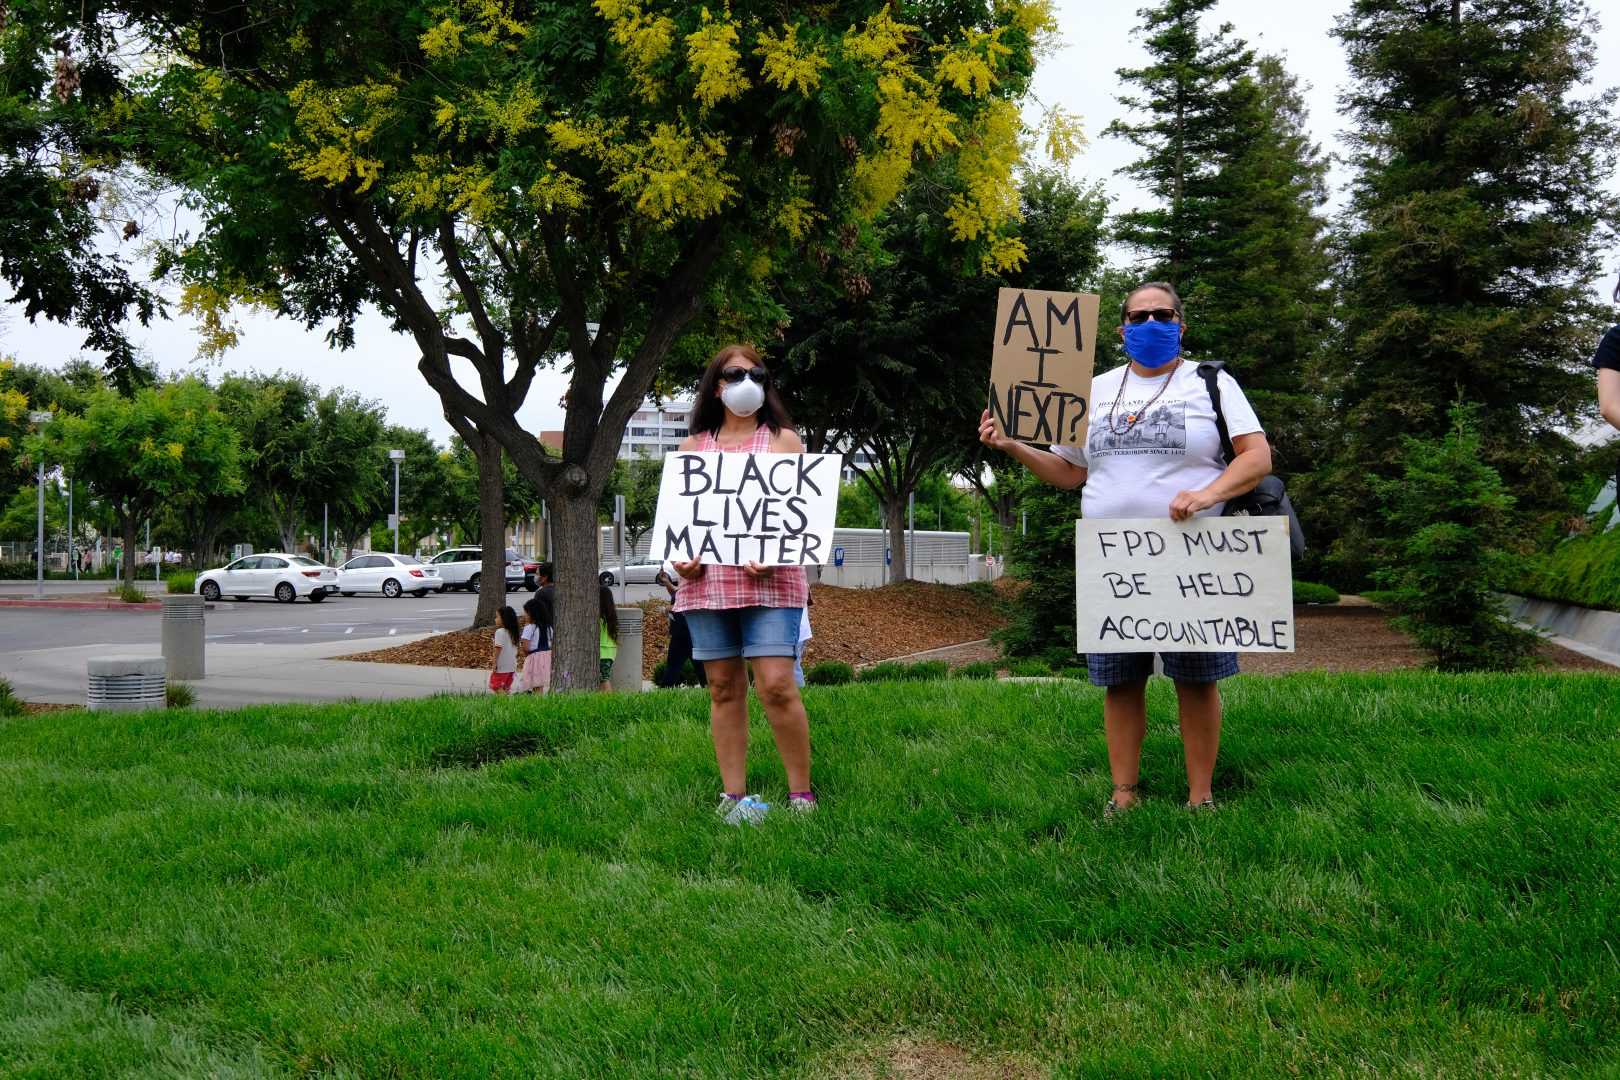 Protestors+in+Fresno+hold+signs+up+alongside+a+march+to+the+Fresno+Police+Department+headquarters+on+Sunday%2C+May+31%2C+2020.+%28Zaeem+Shaikh%2FThe+Collegian%29